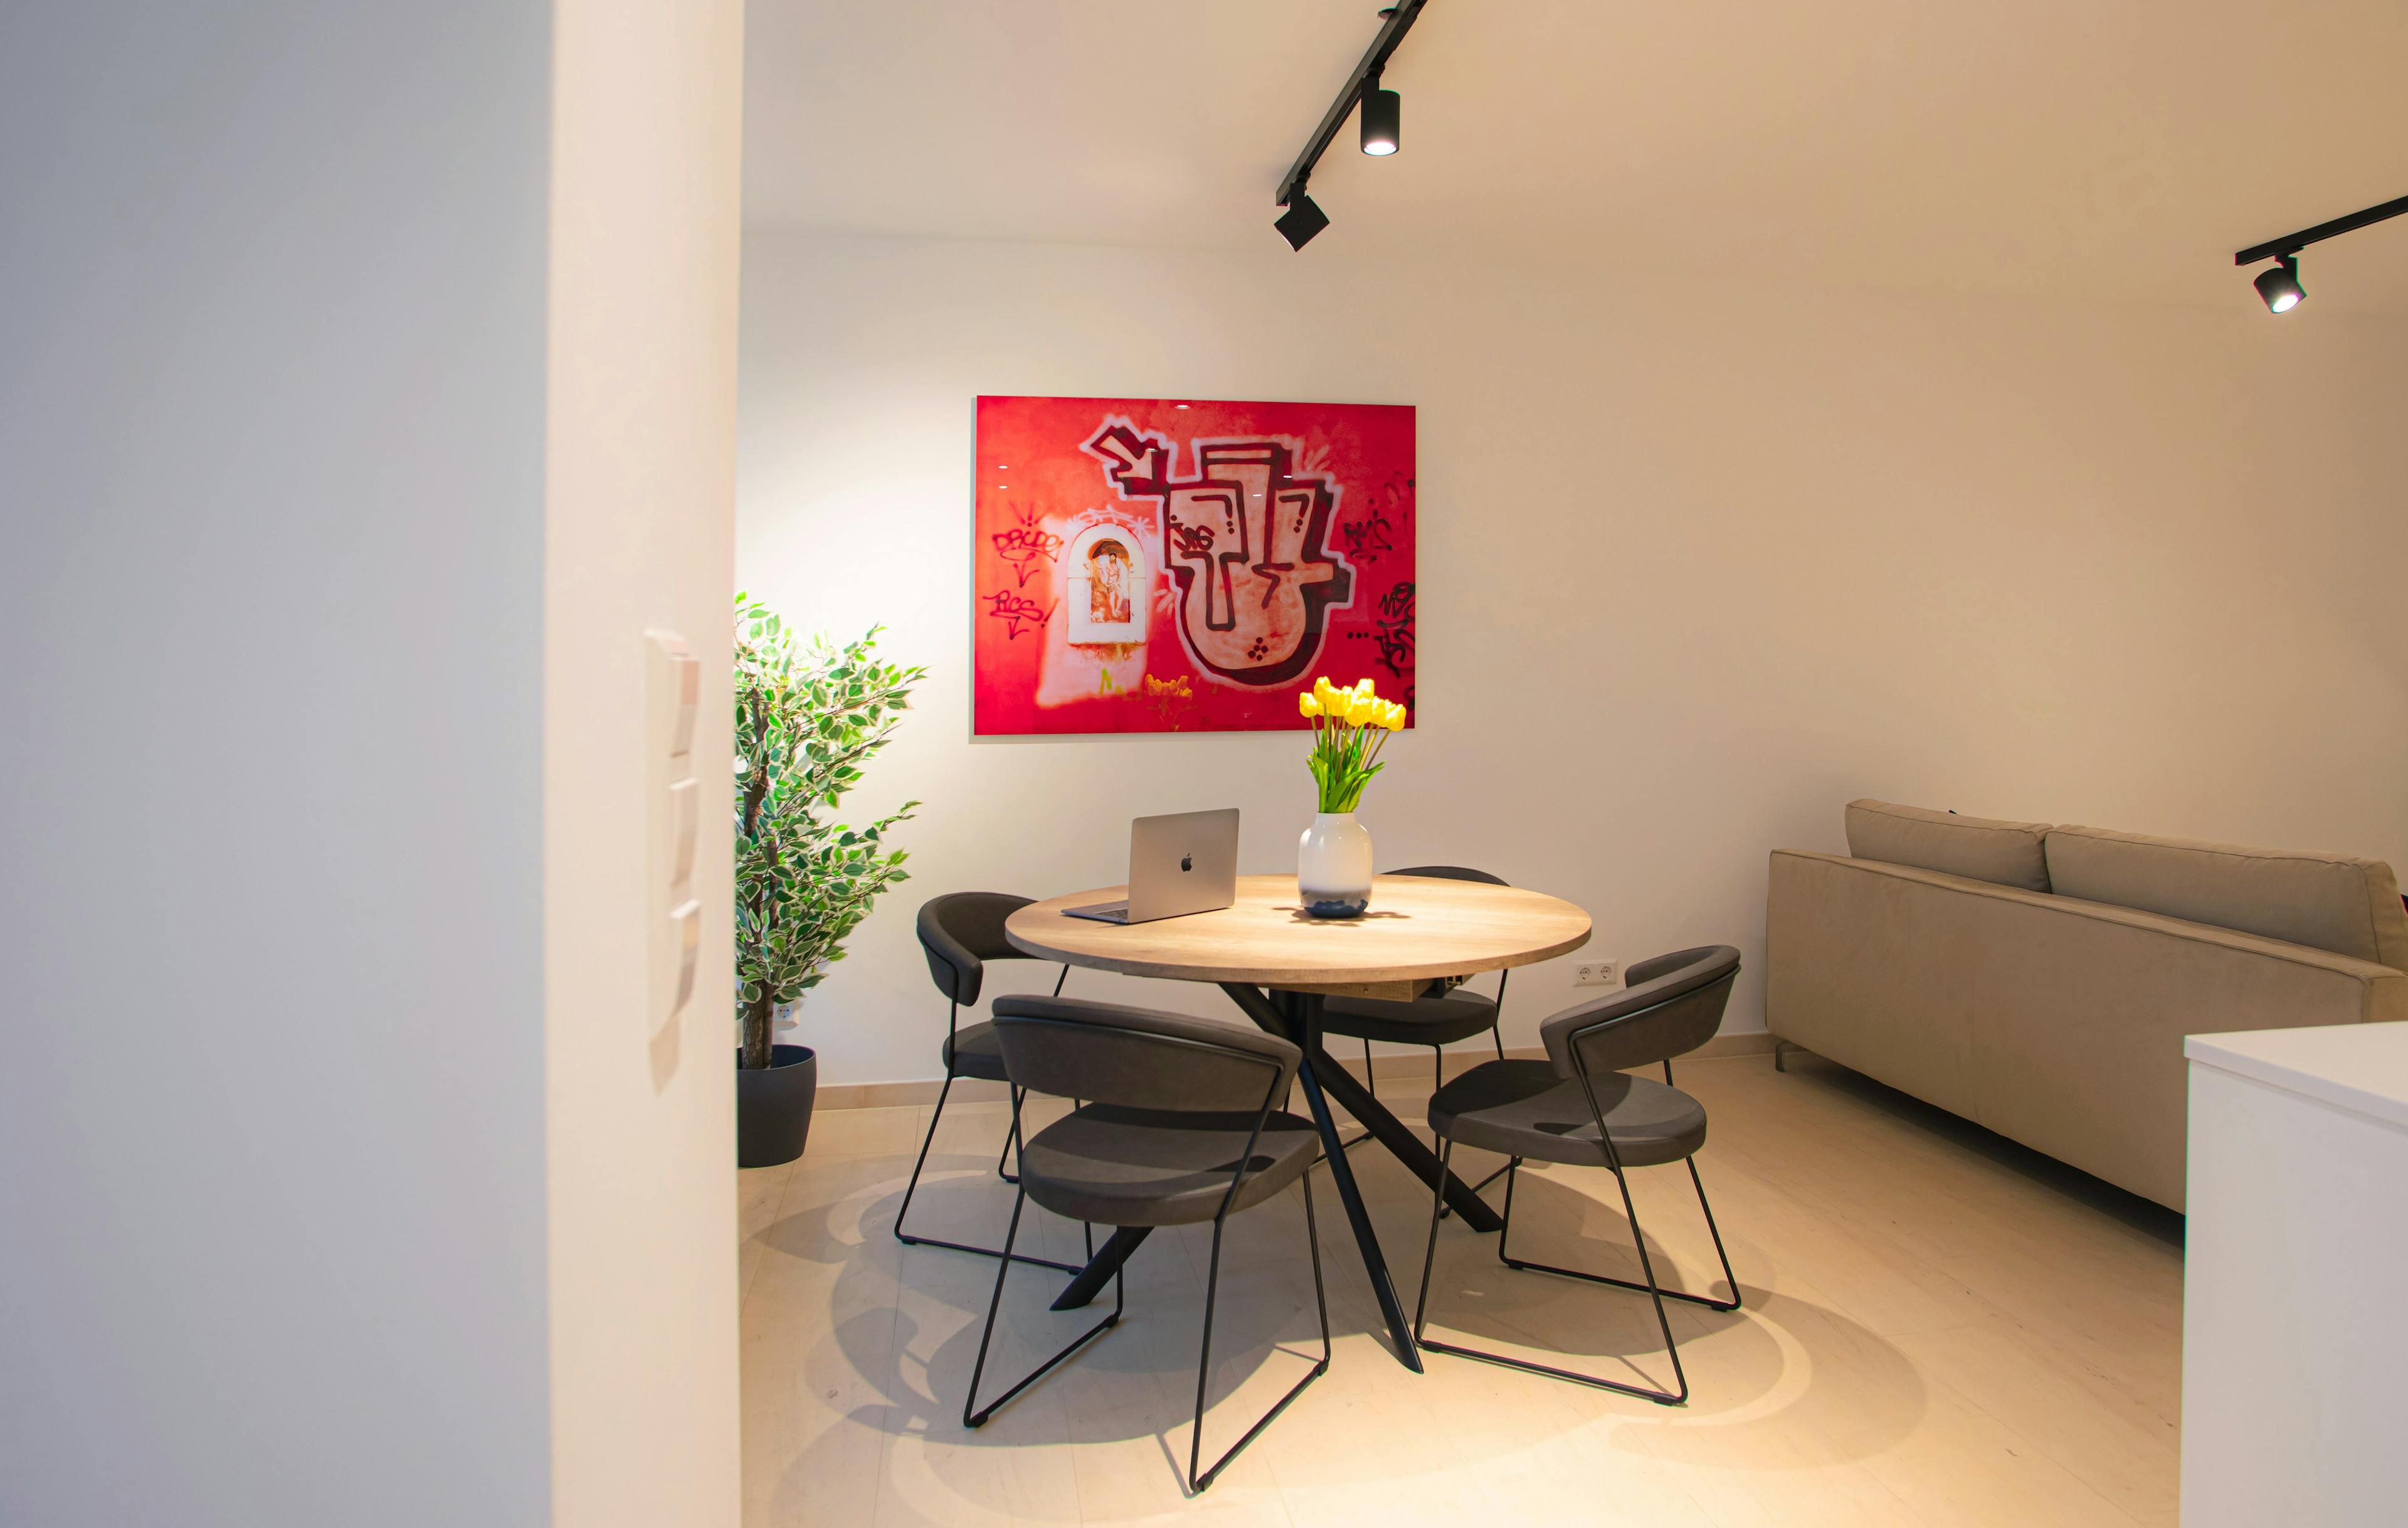 Round dining table with chairs, next to the sofa, on the right. On the left, there are big windows and a big flower in a pot. In front of the table, there is a big red picture hanging on the wall.